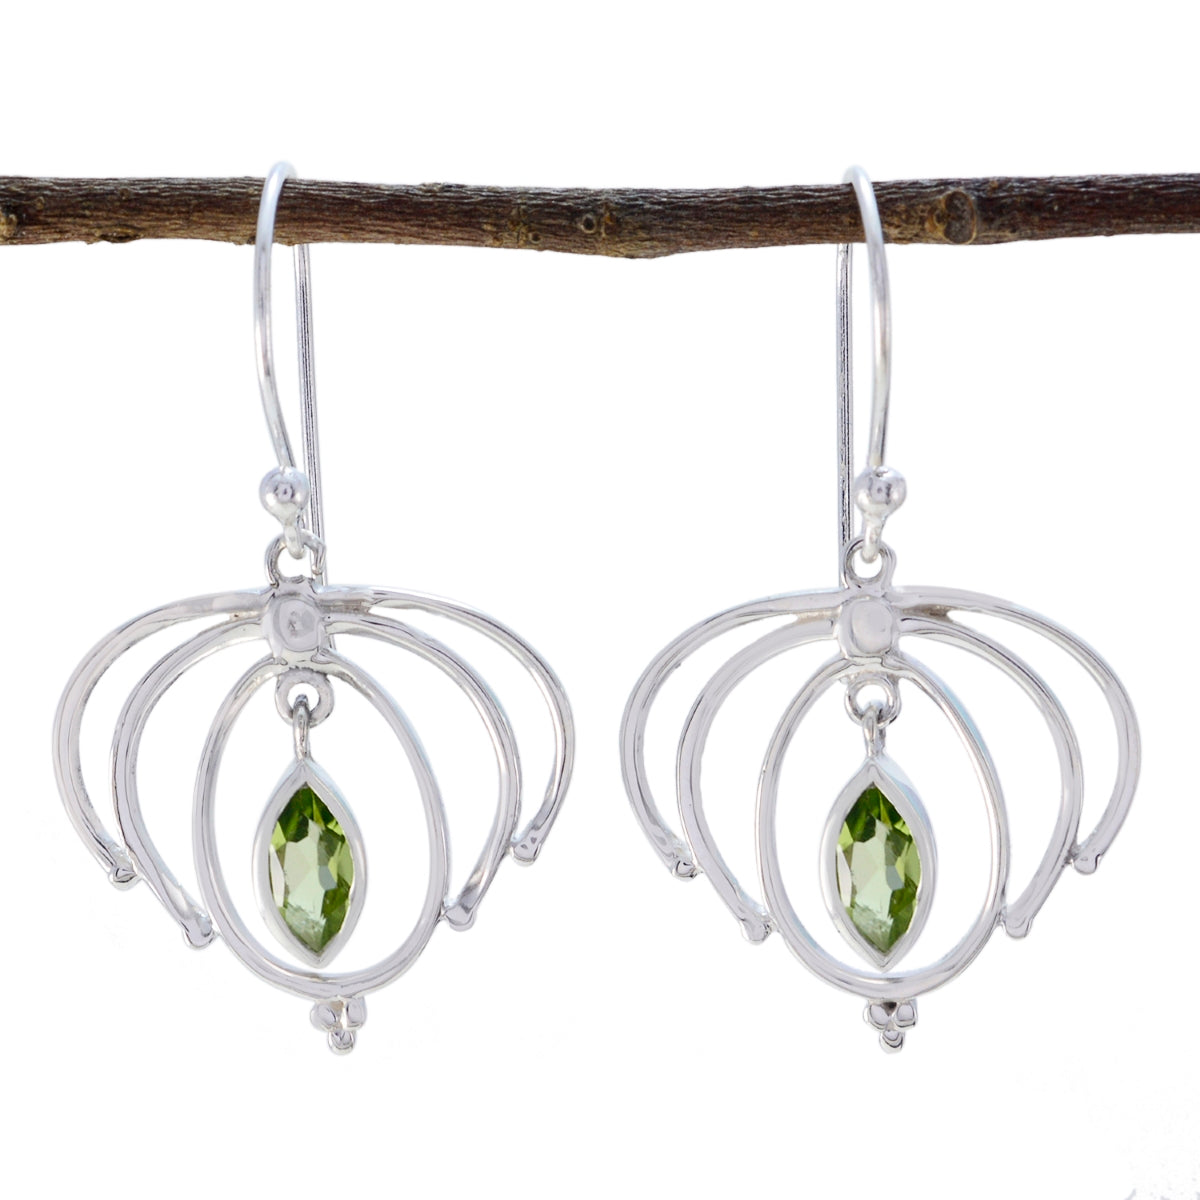 Riyo Nice Gemstone Marquise Faceted Green Peridot Silver Earrings gift for cyber Monday